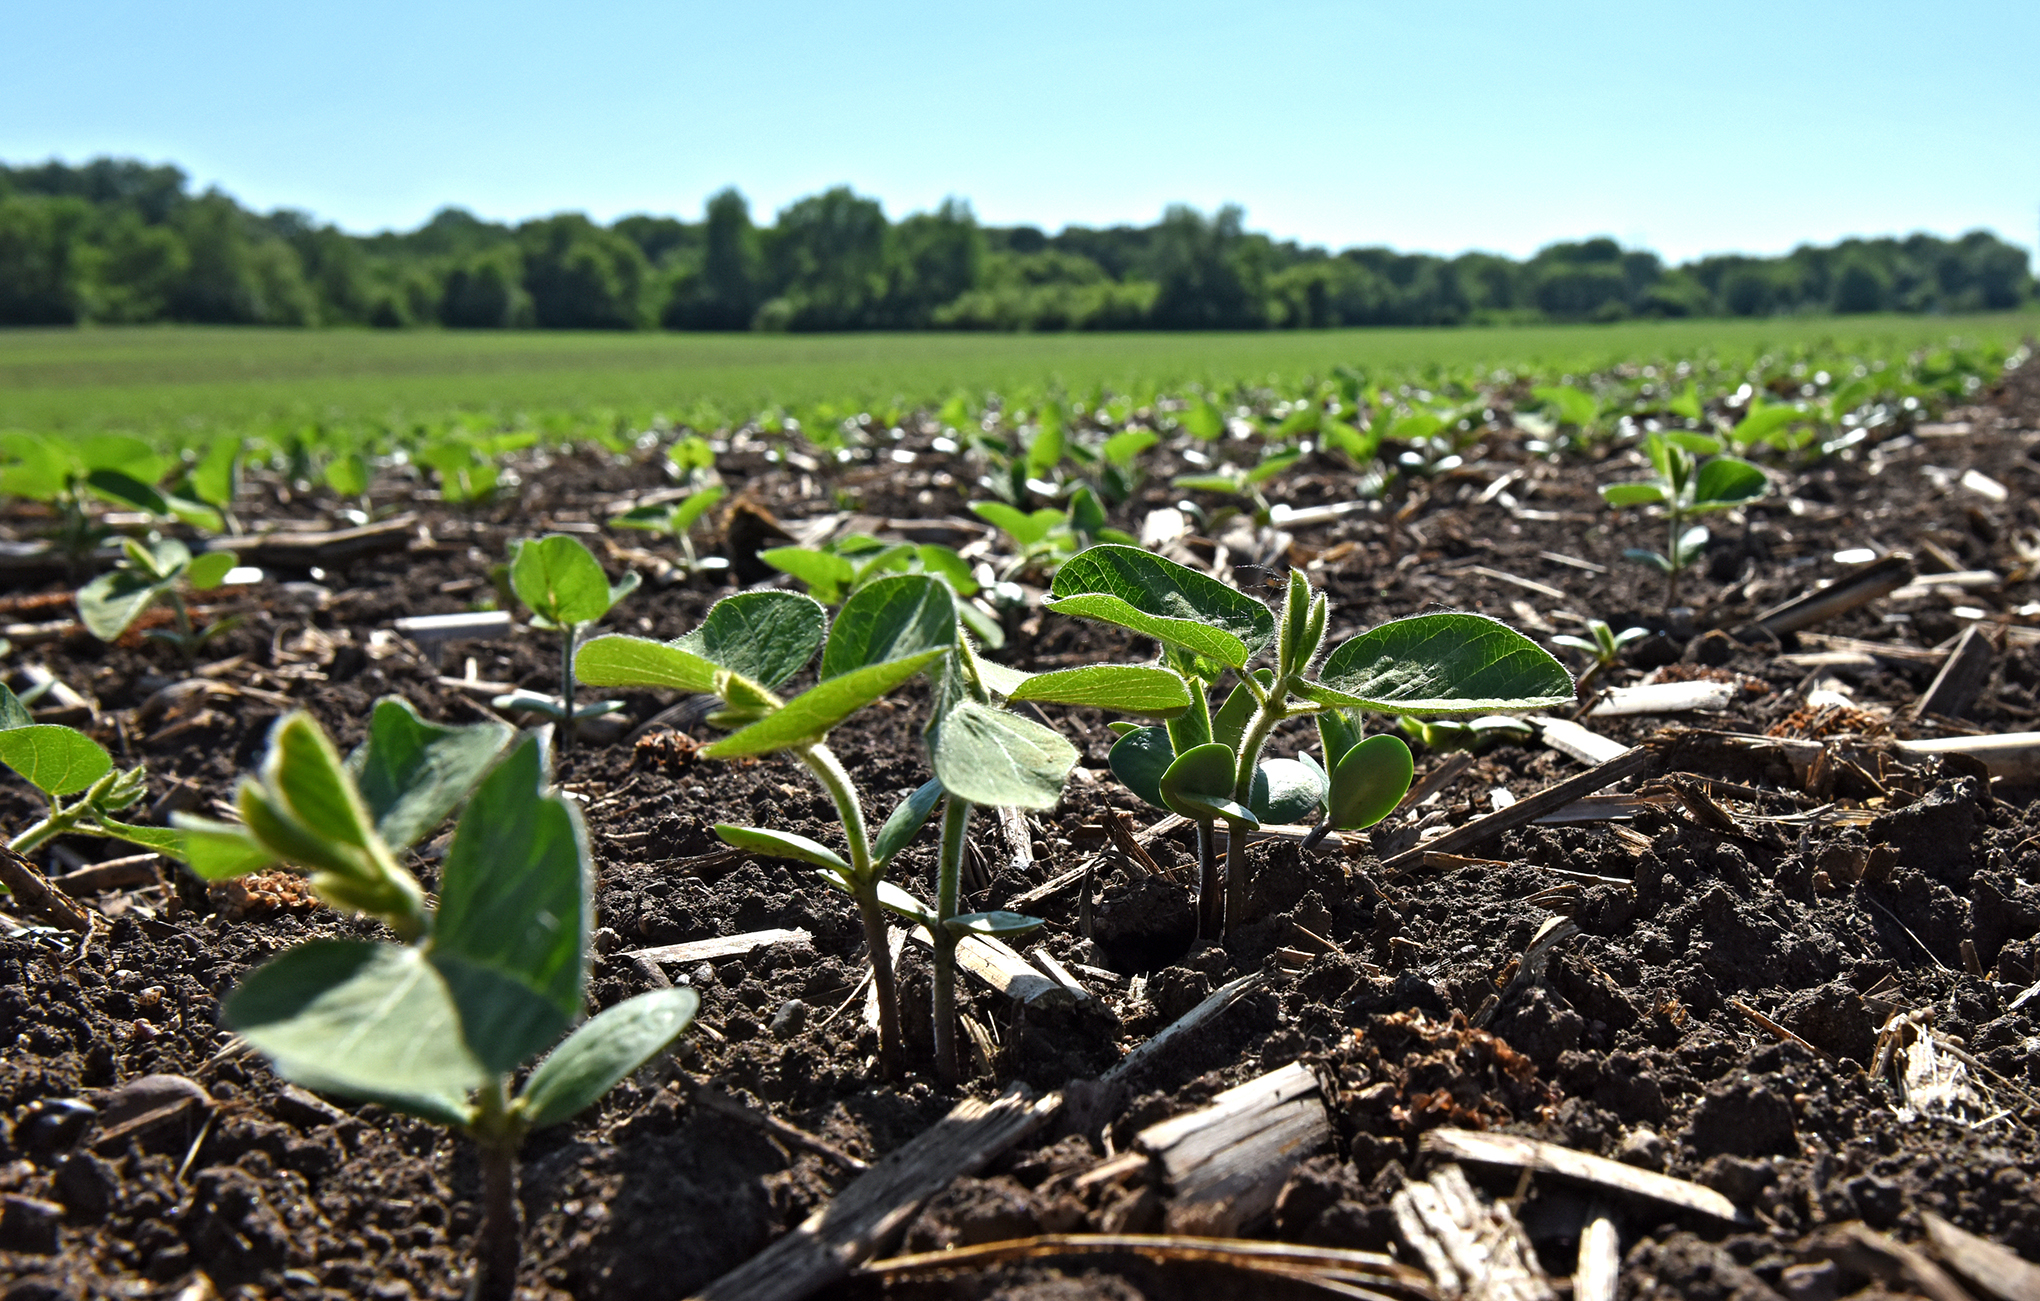 Young soybean plants in soil